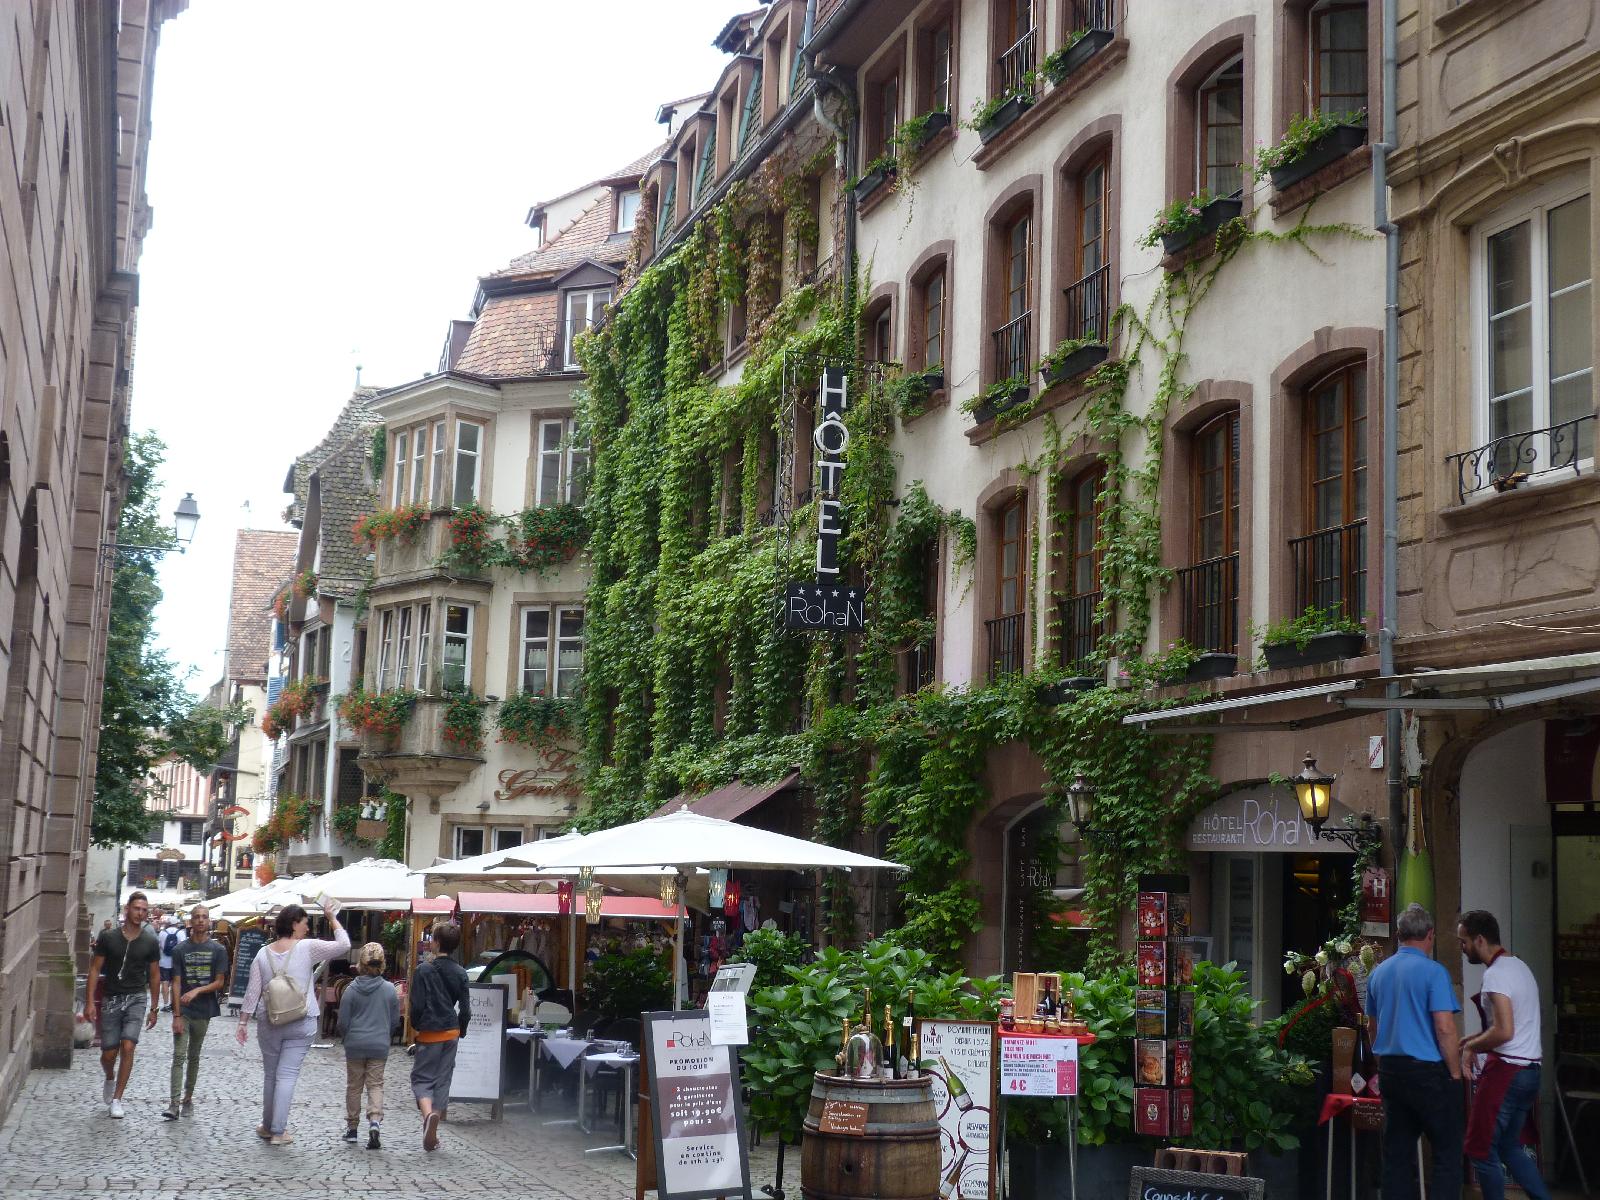 Another charming street with cafes and great plants